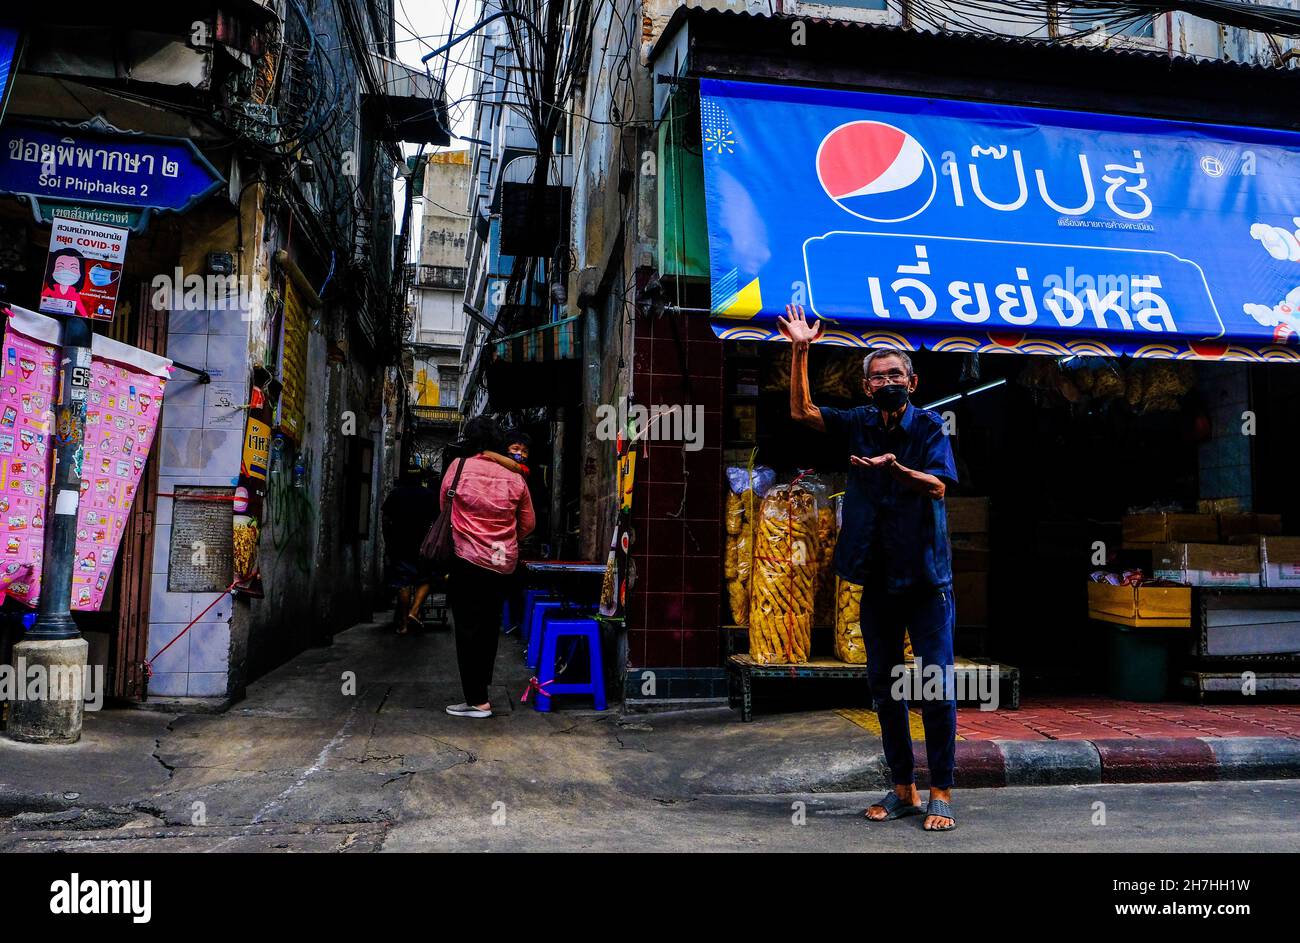 An elderly man makes a gesture in a street in Chinatown, Bangkok, Thailand. Stock Photo